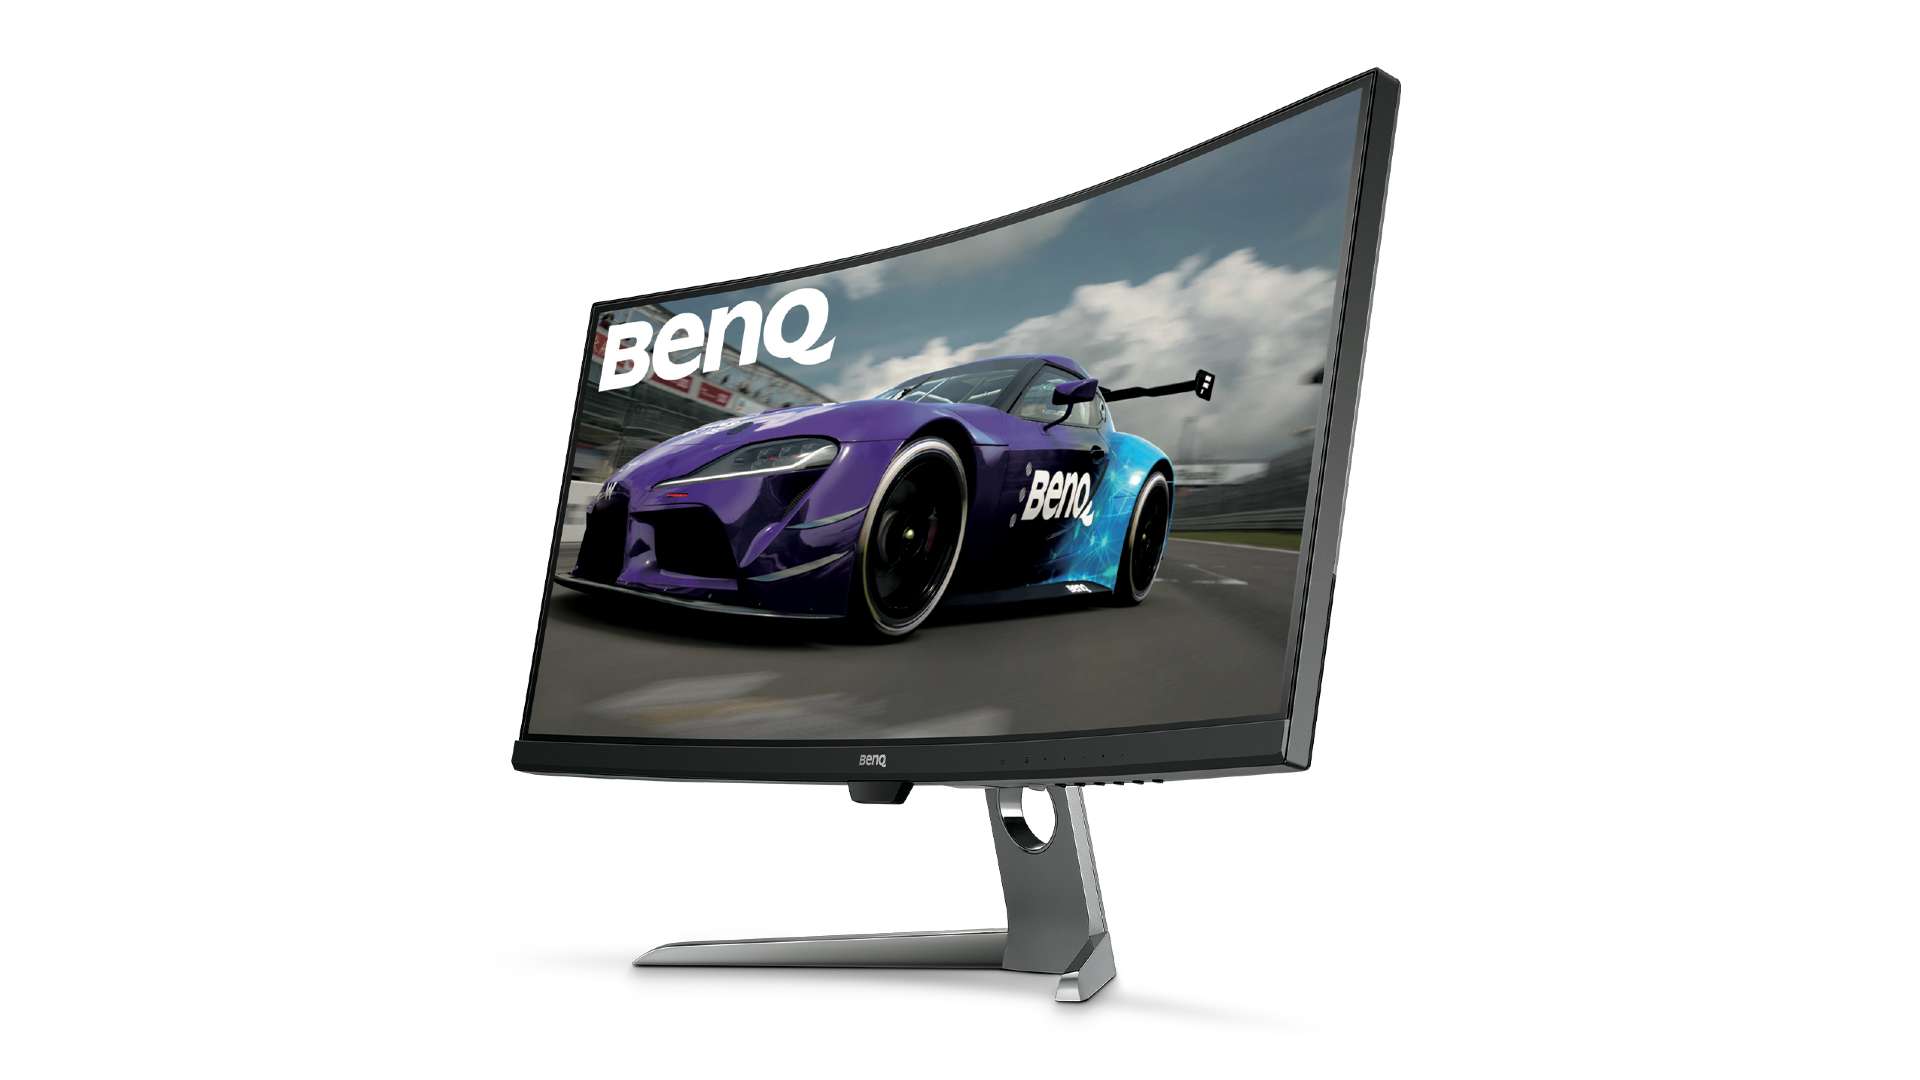 The BenQ EX3501R gaming monitor sits facing towards the left against a white background